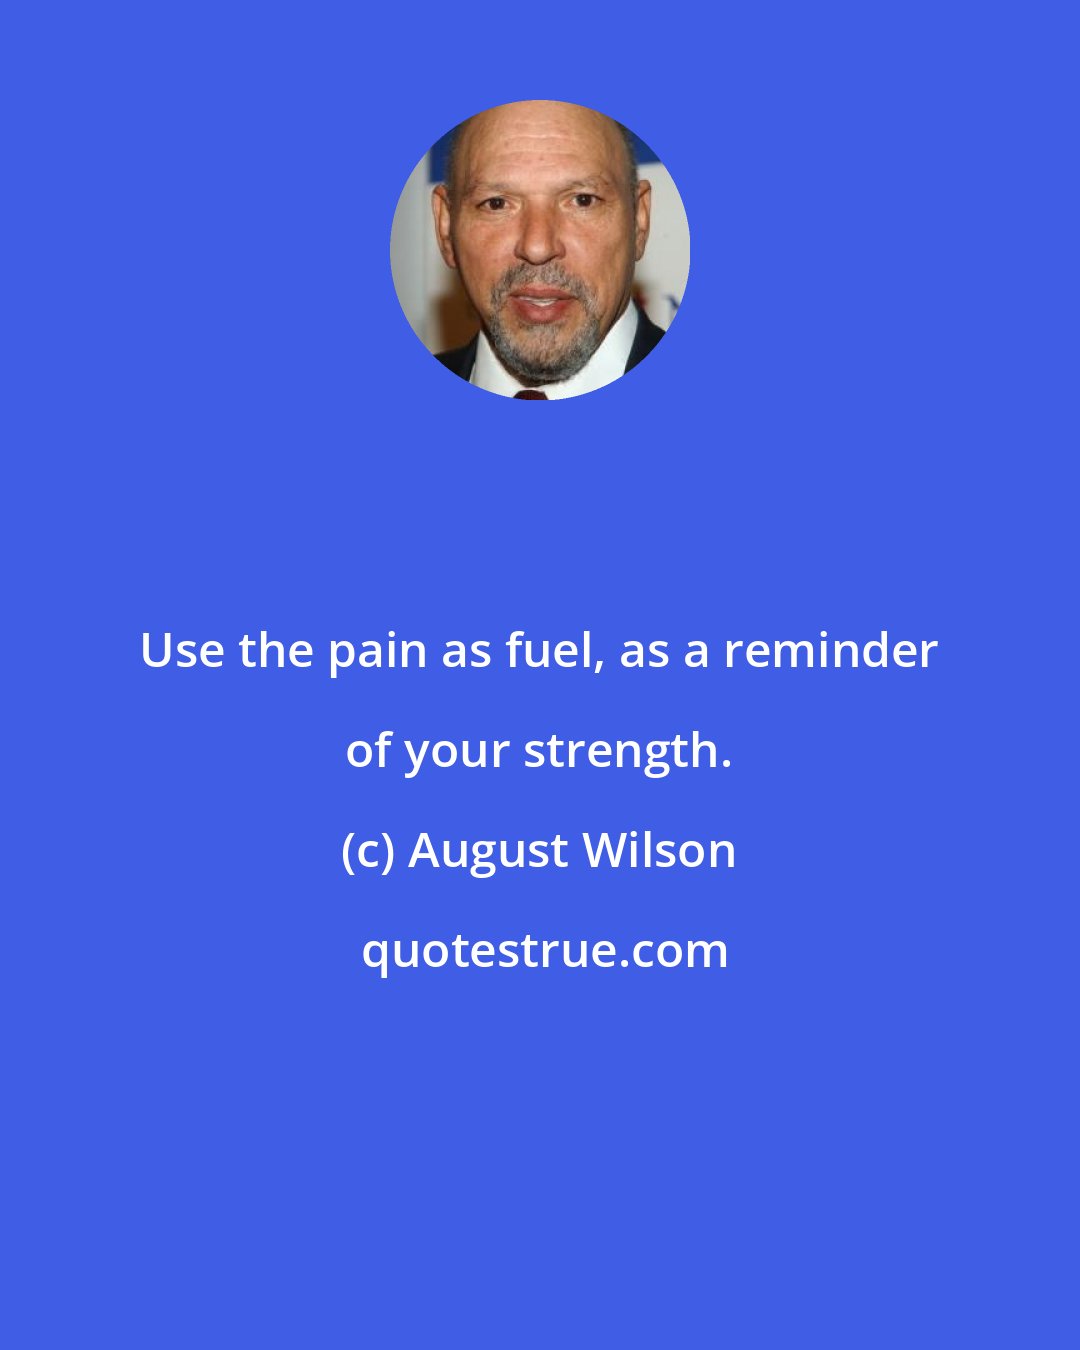 August Wilson: Use the pain as fuel, as a reminder of your strength.